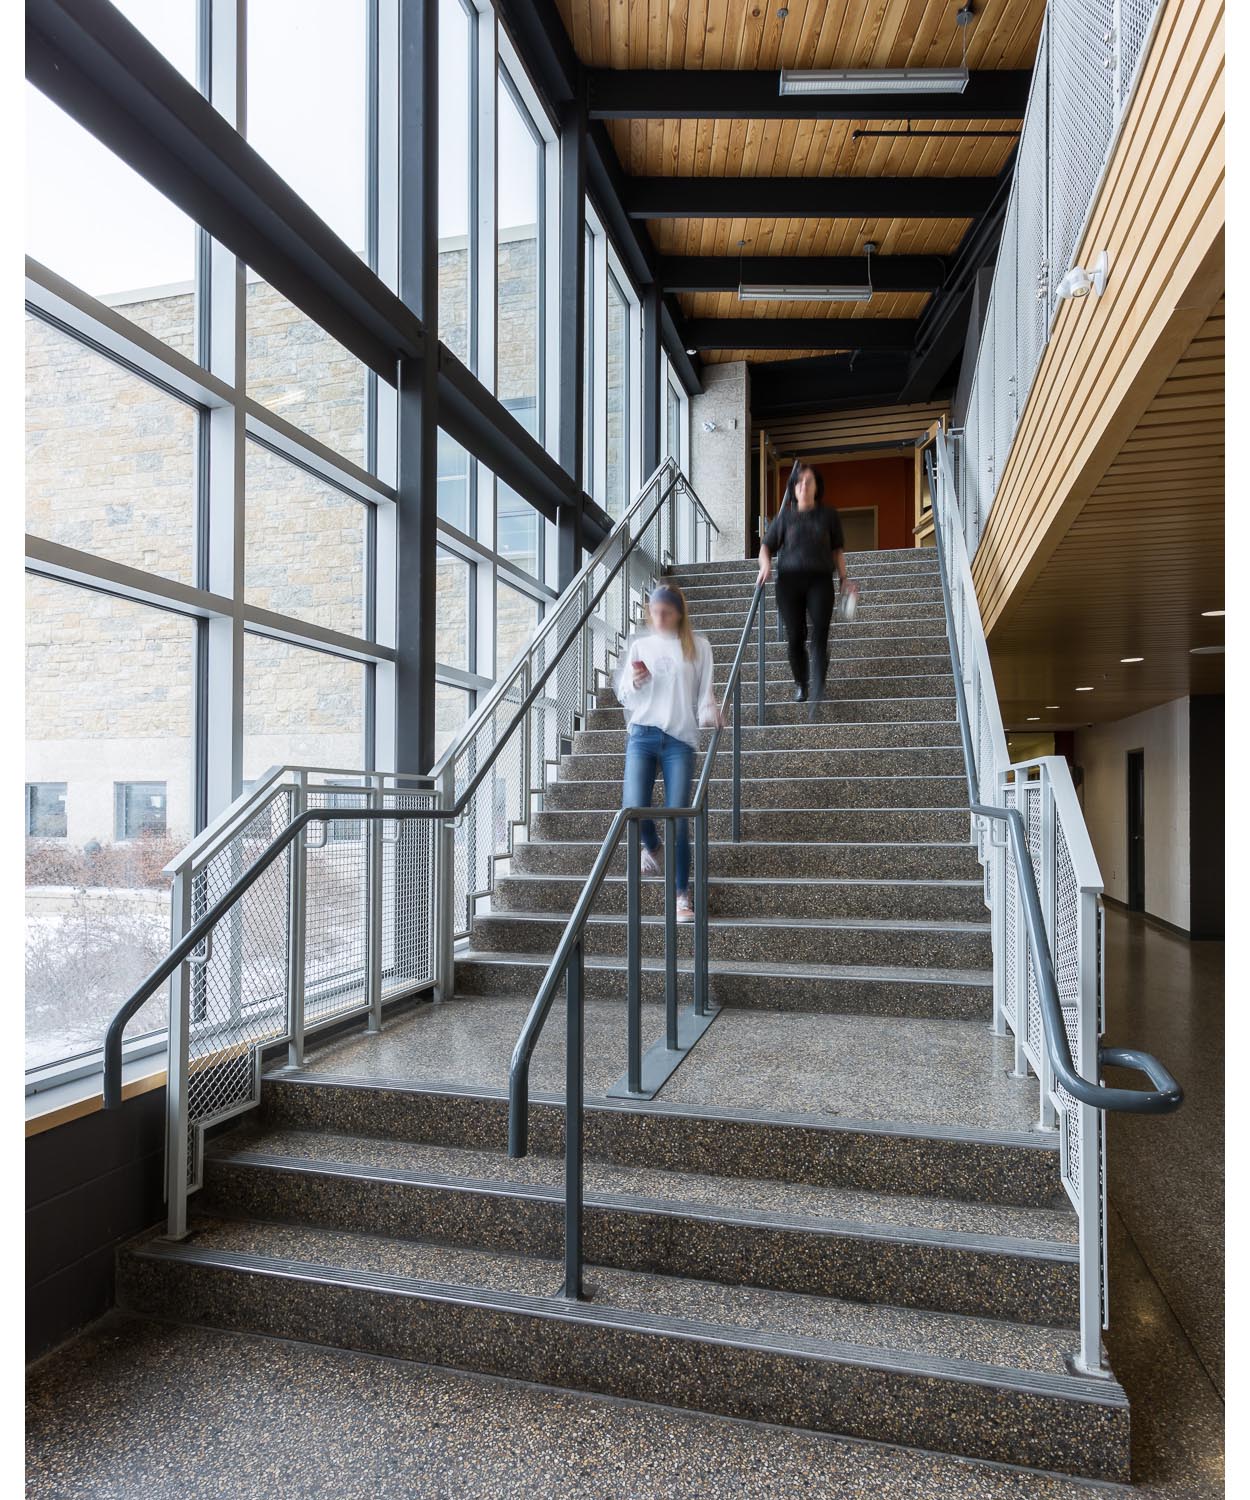  Northlands Parkway Collegiate, interior photo of staircase with people descending / Photo:  Lindsay Reid  